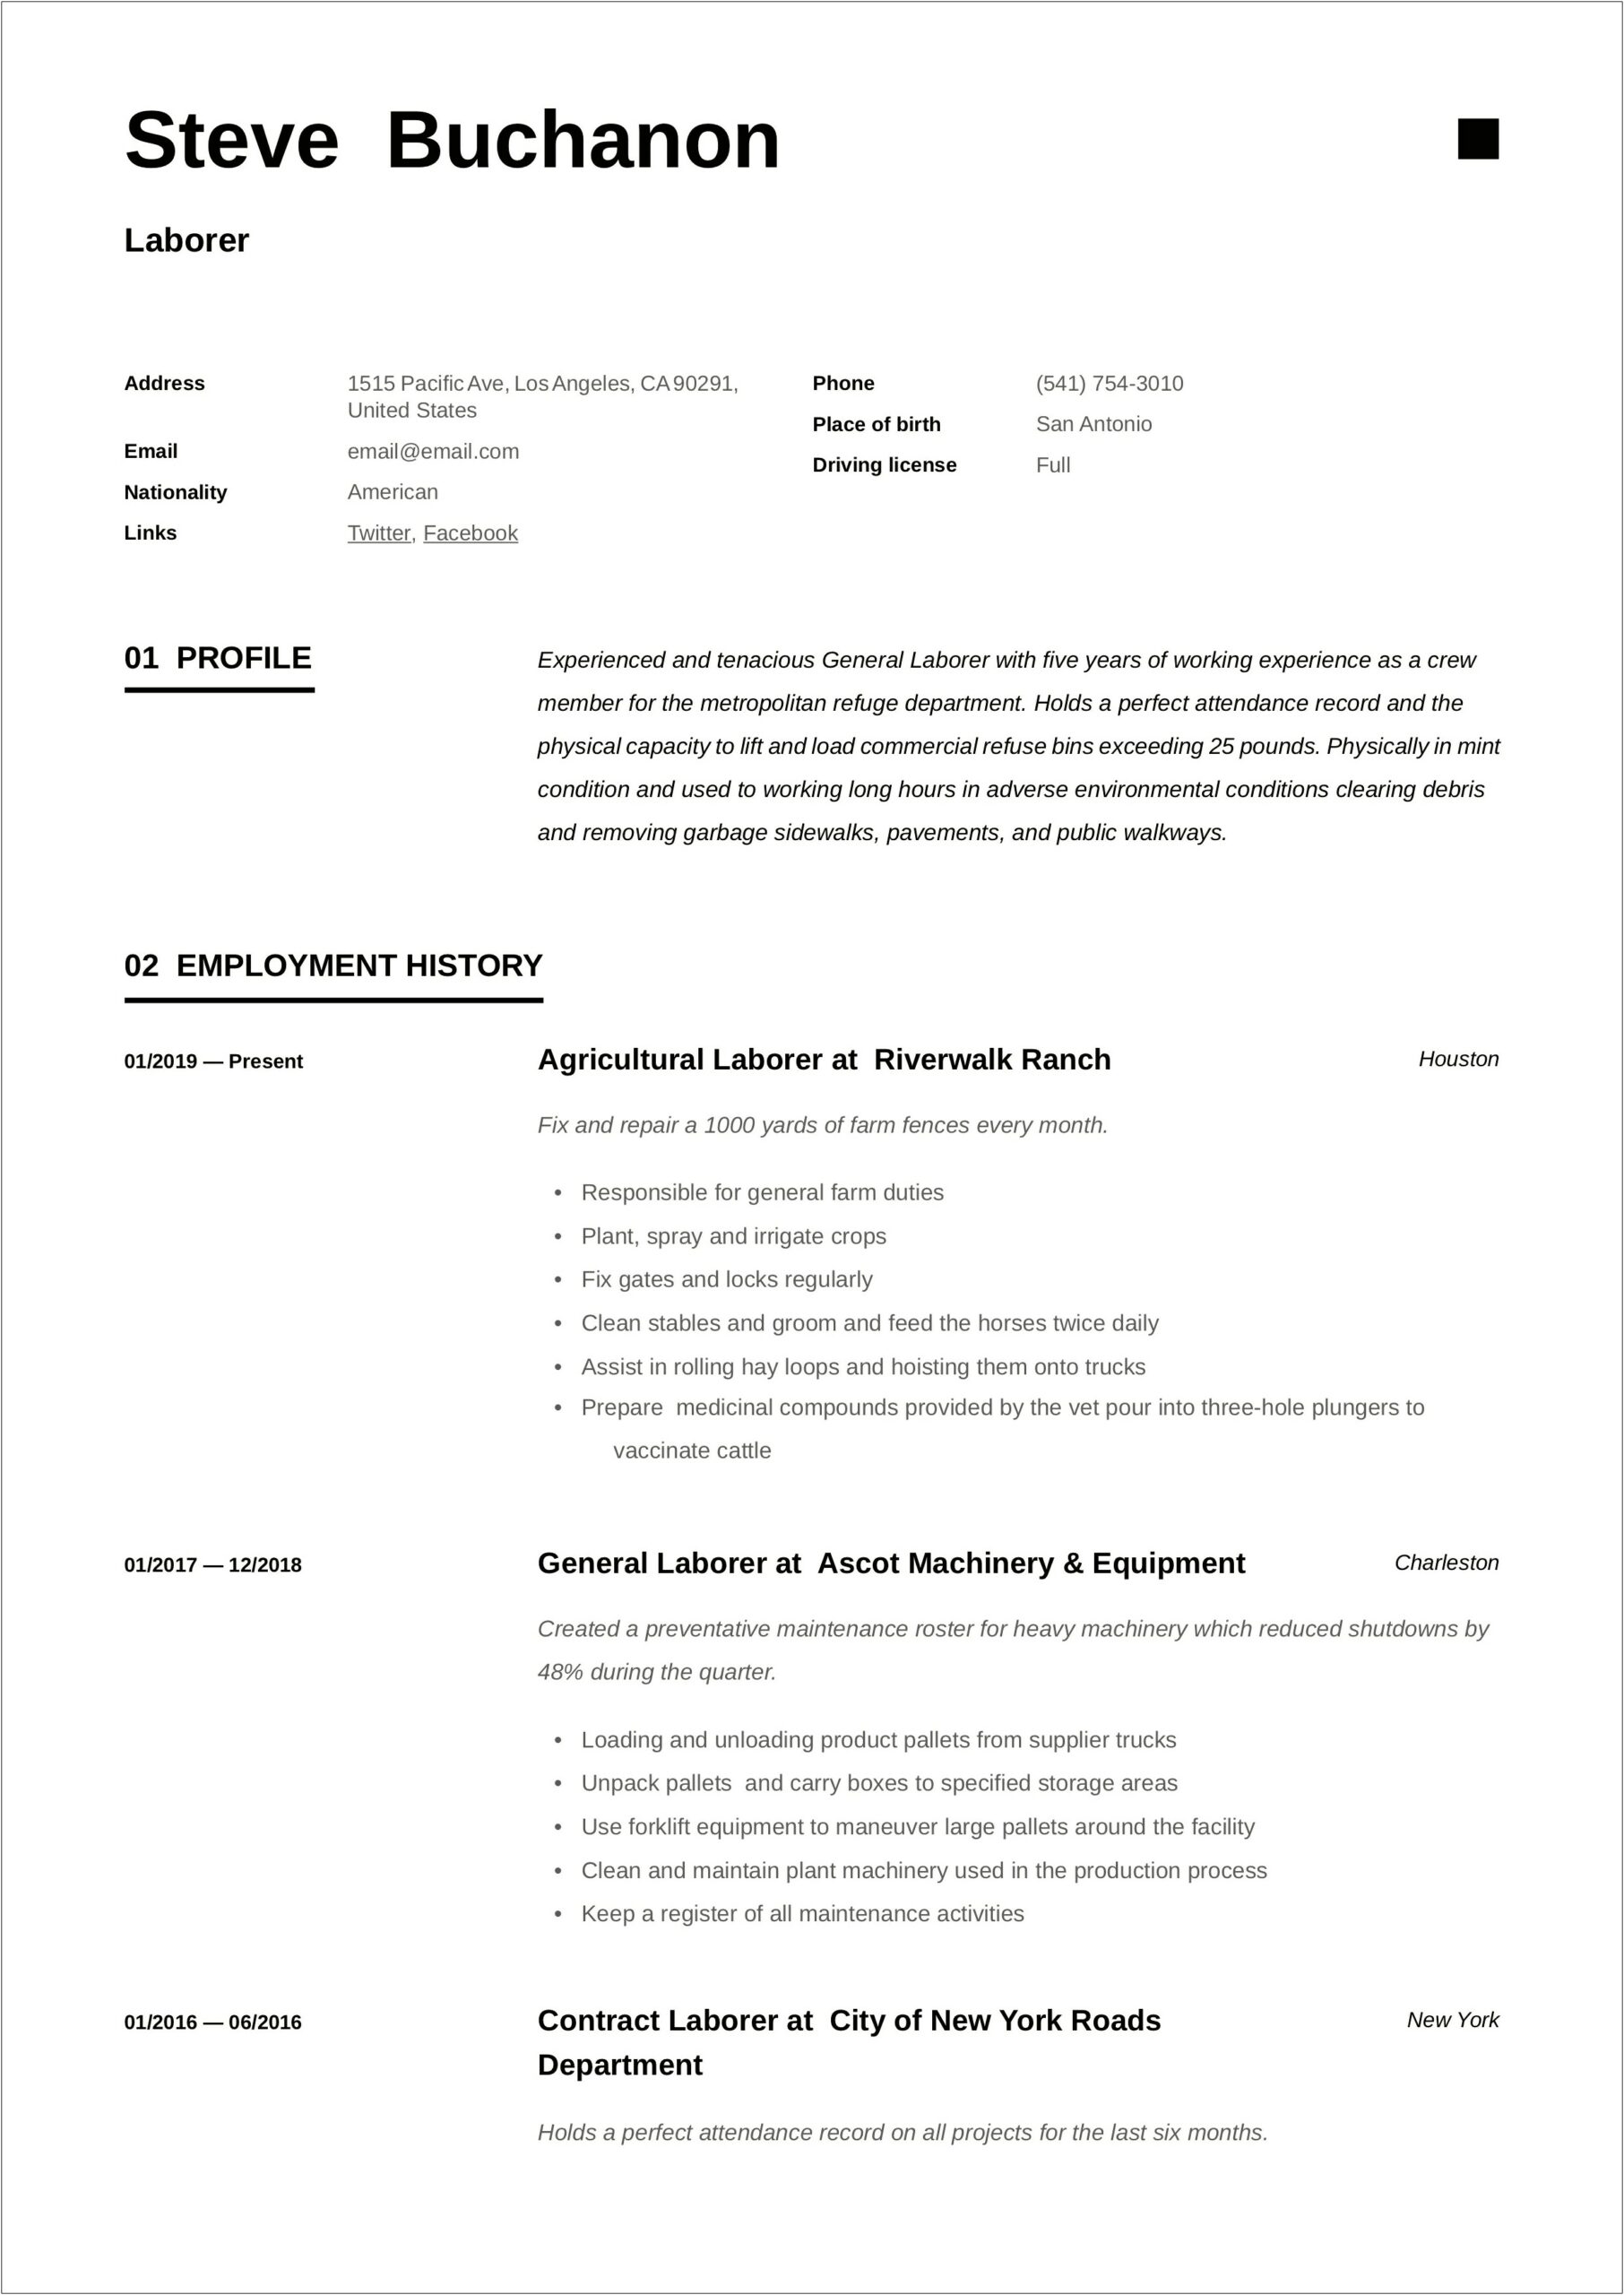 Resume Summary Examples For General Labor